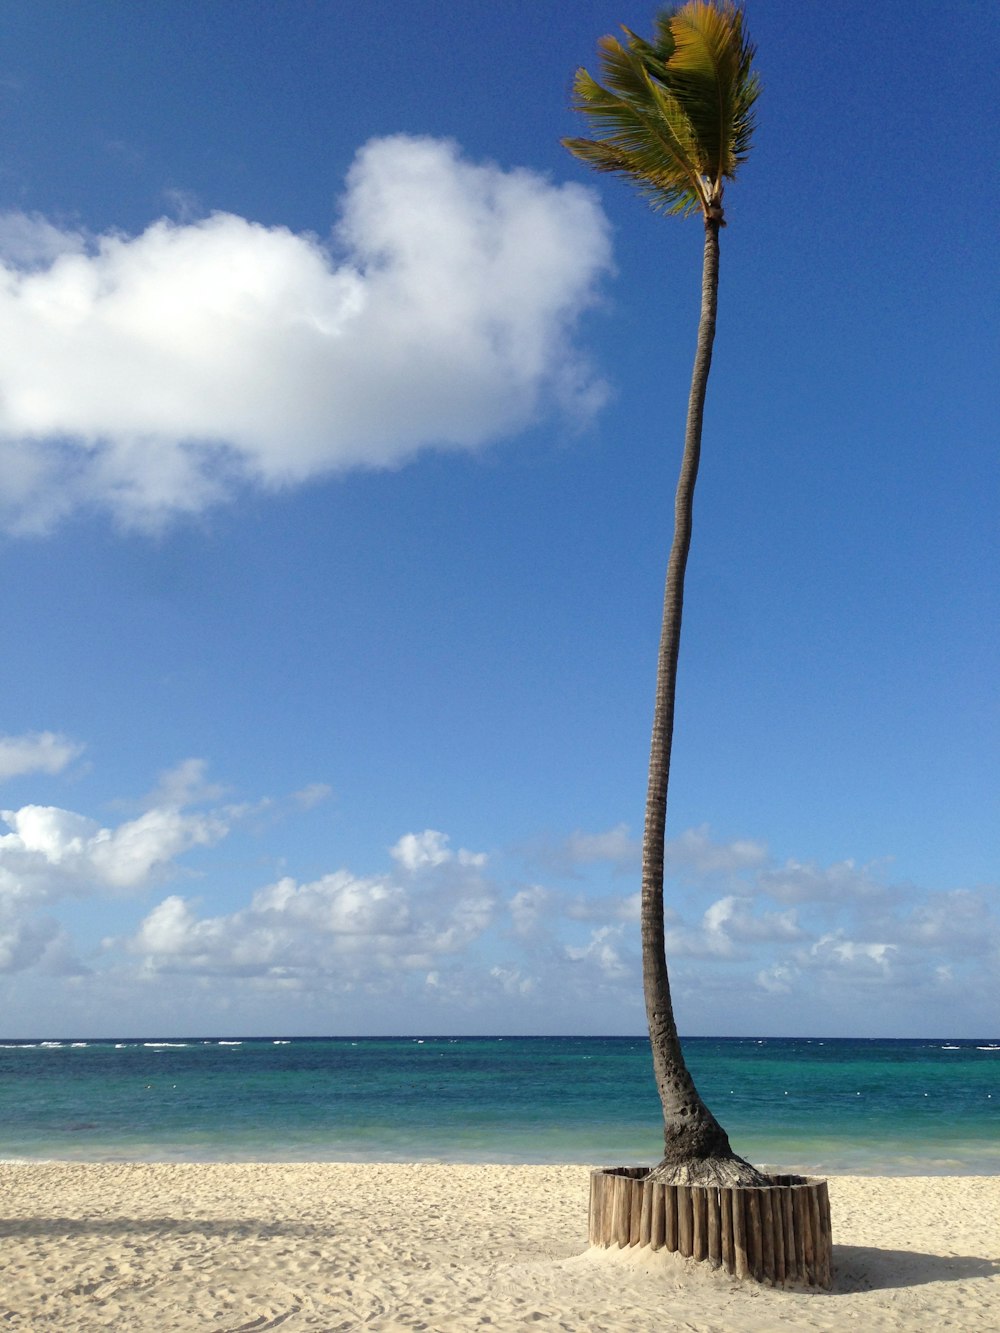 a palm tree on a beach with a blue sky in the background